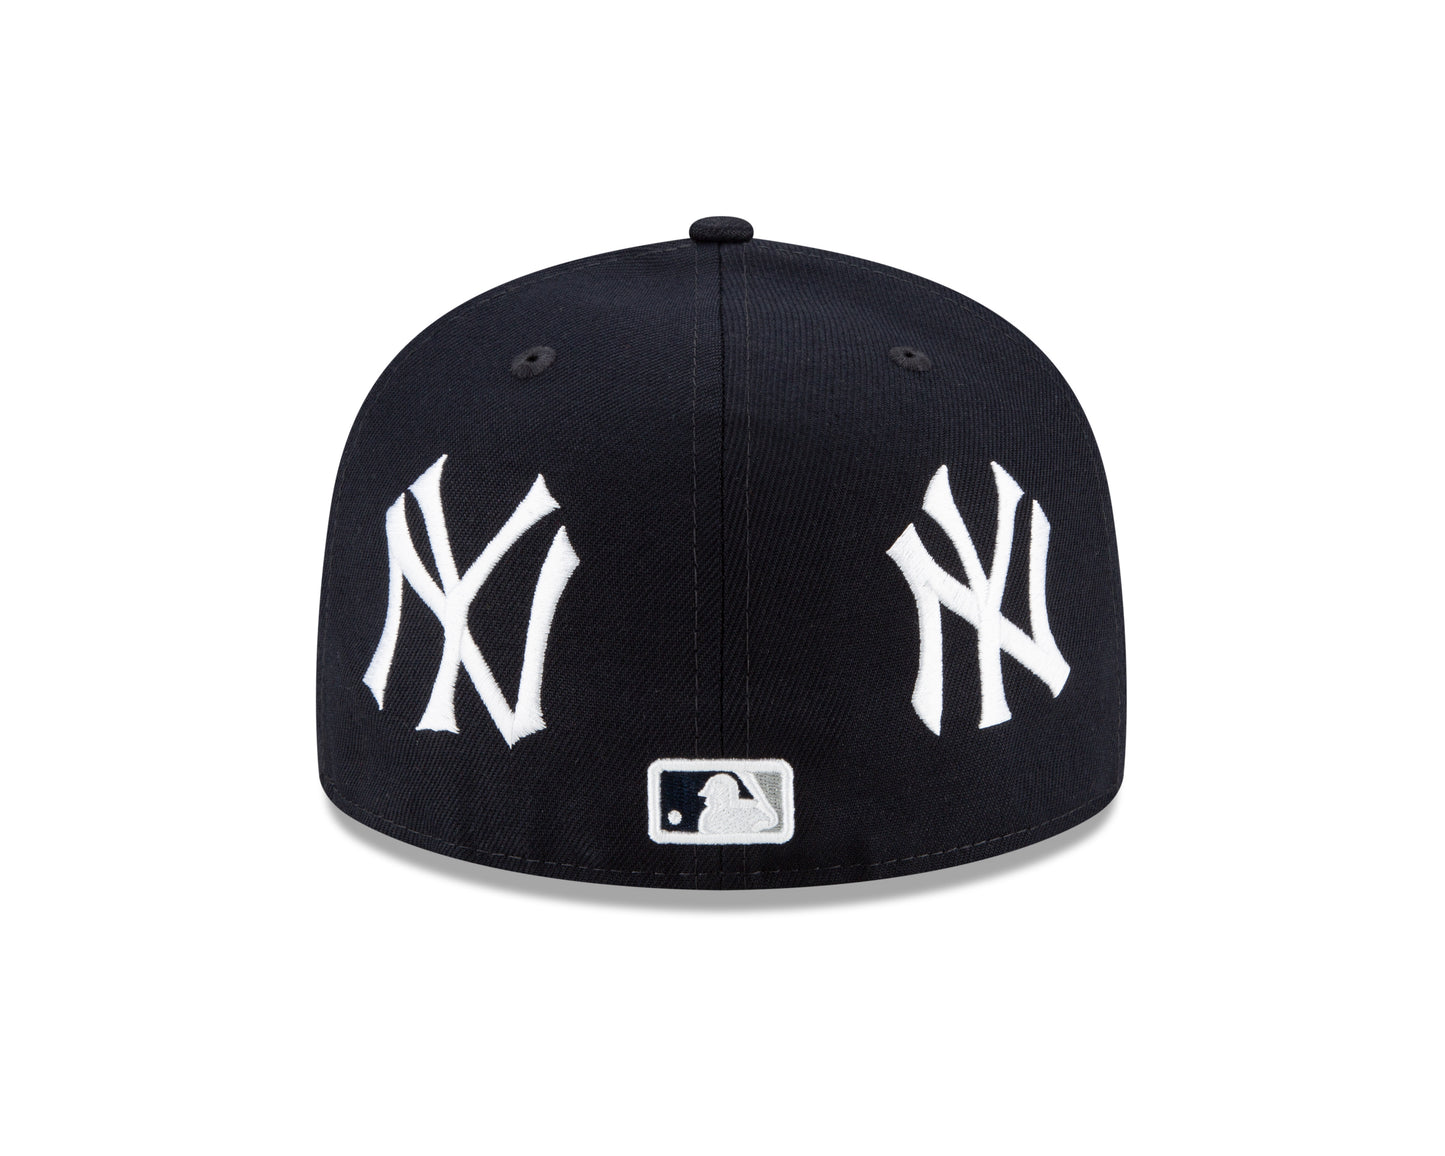 New York Yankees New Era Pride Patch Patch 59FIFTY Hat - Navy